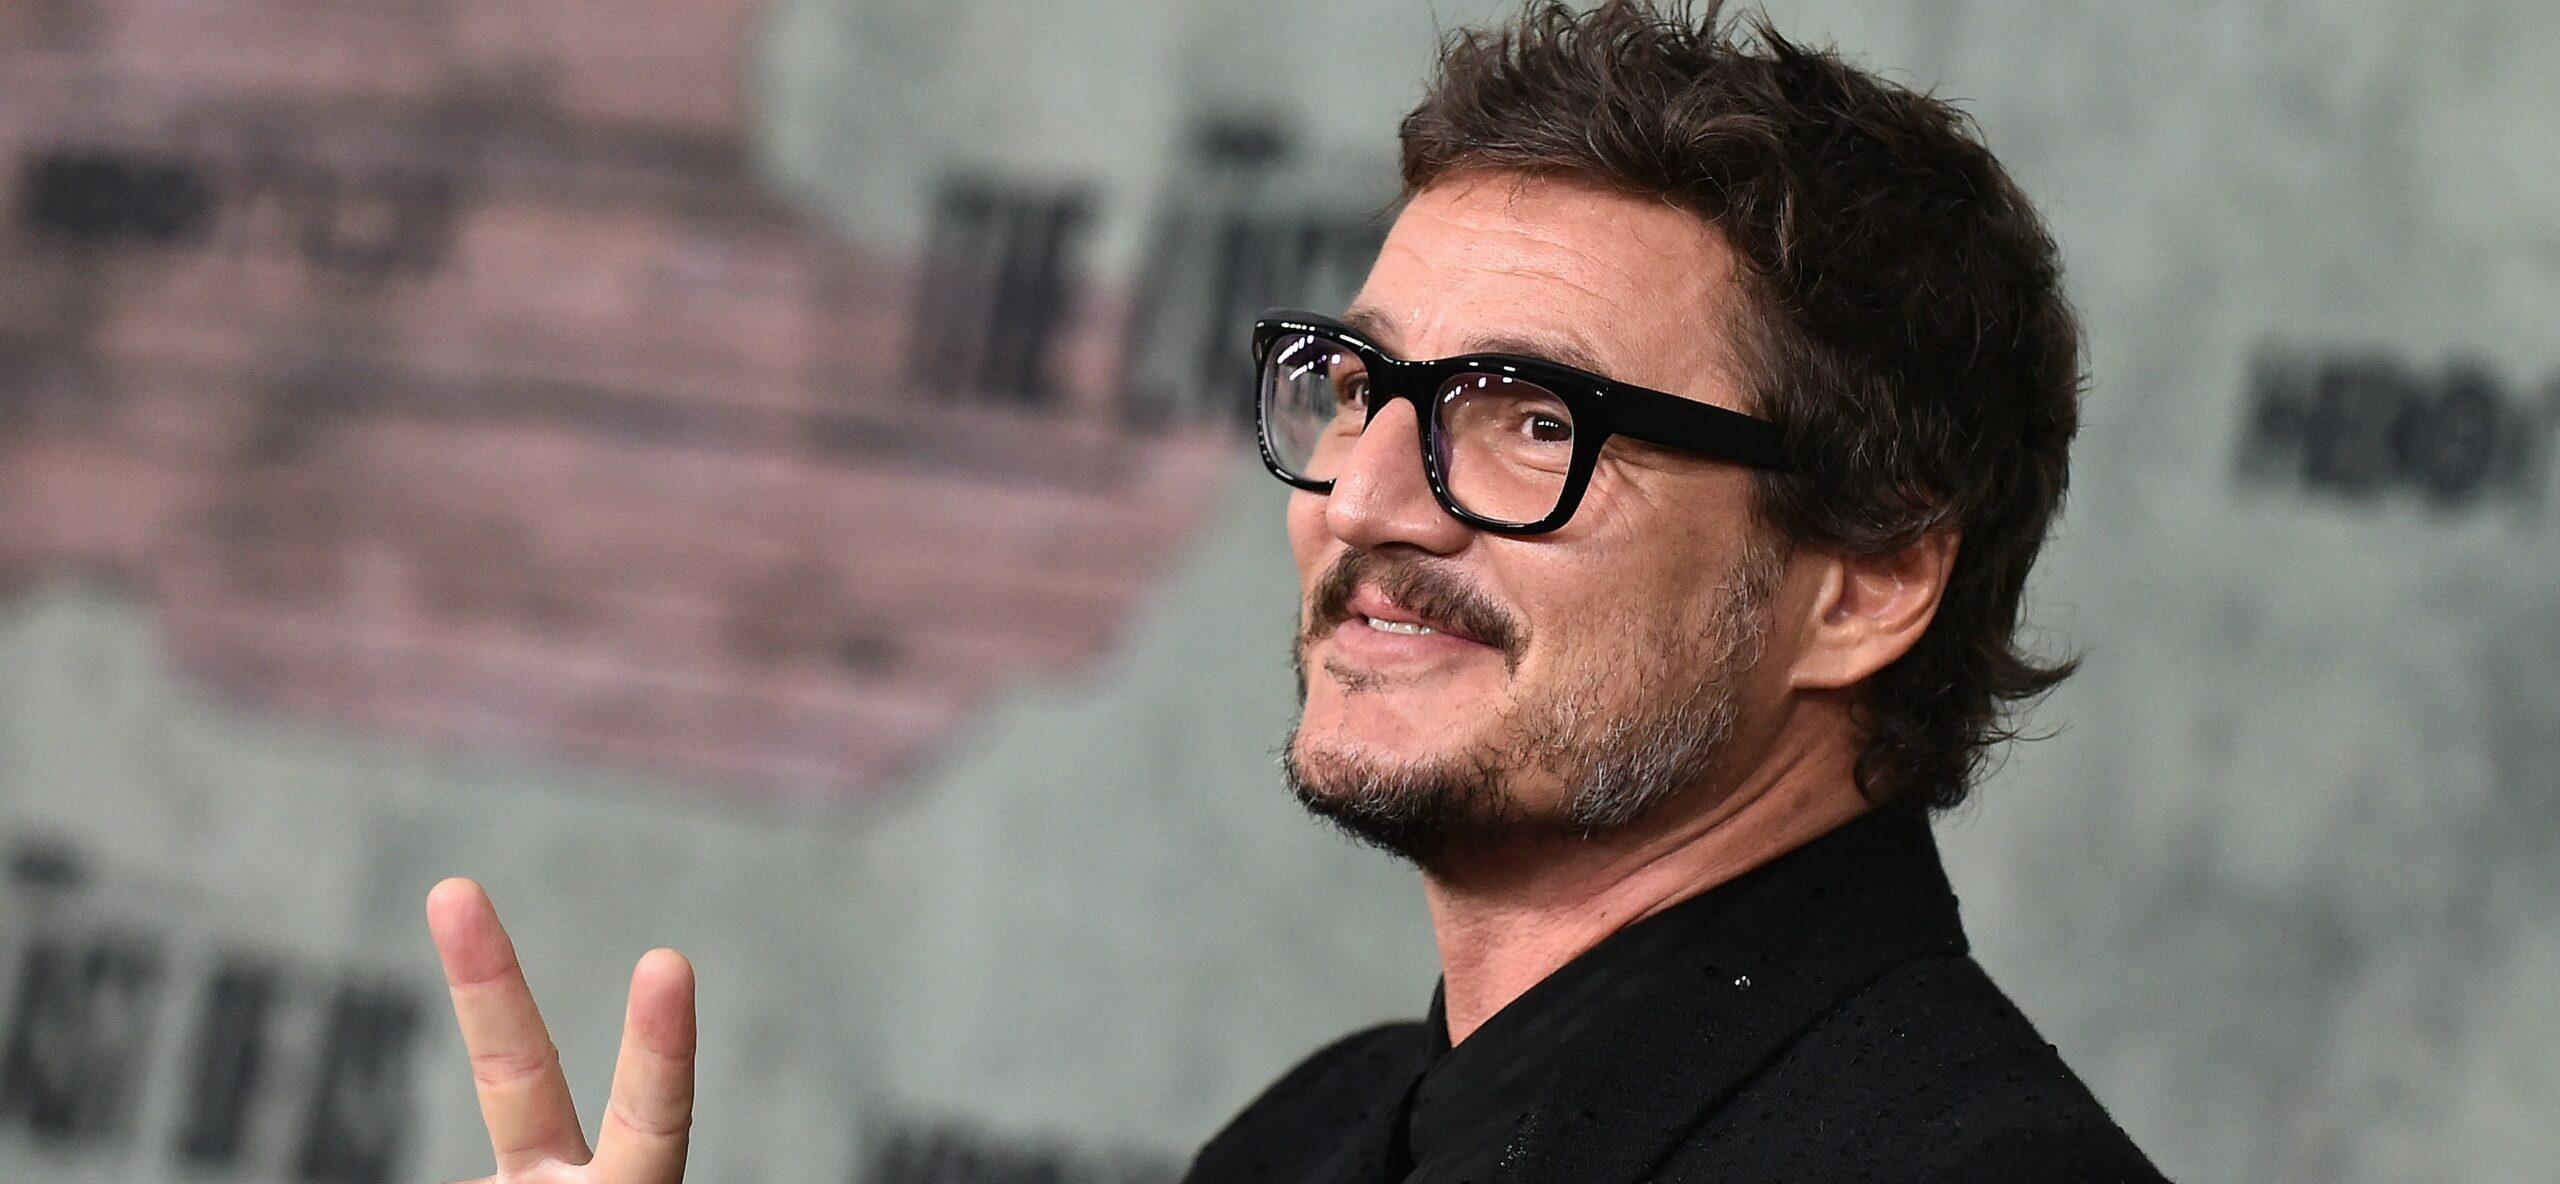 Pedro Pascal explains why people want him to drink their saliva